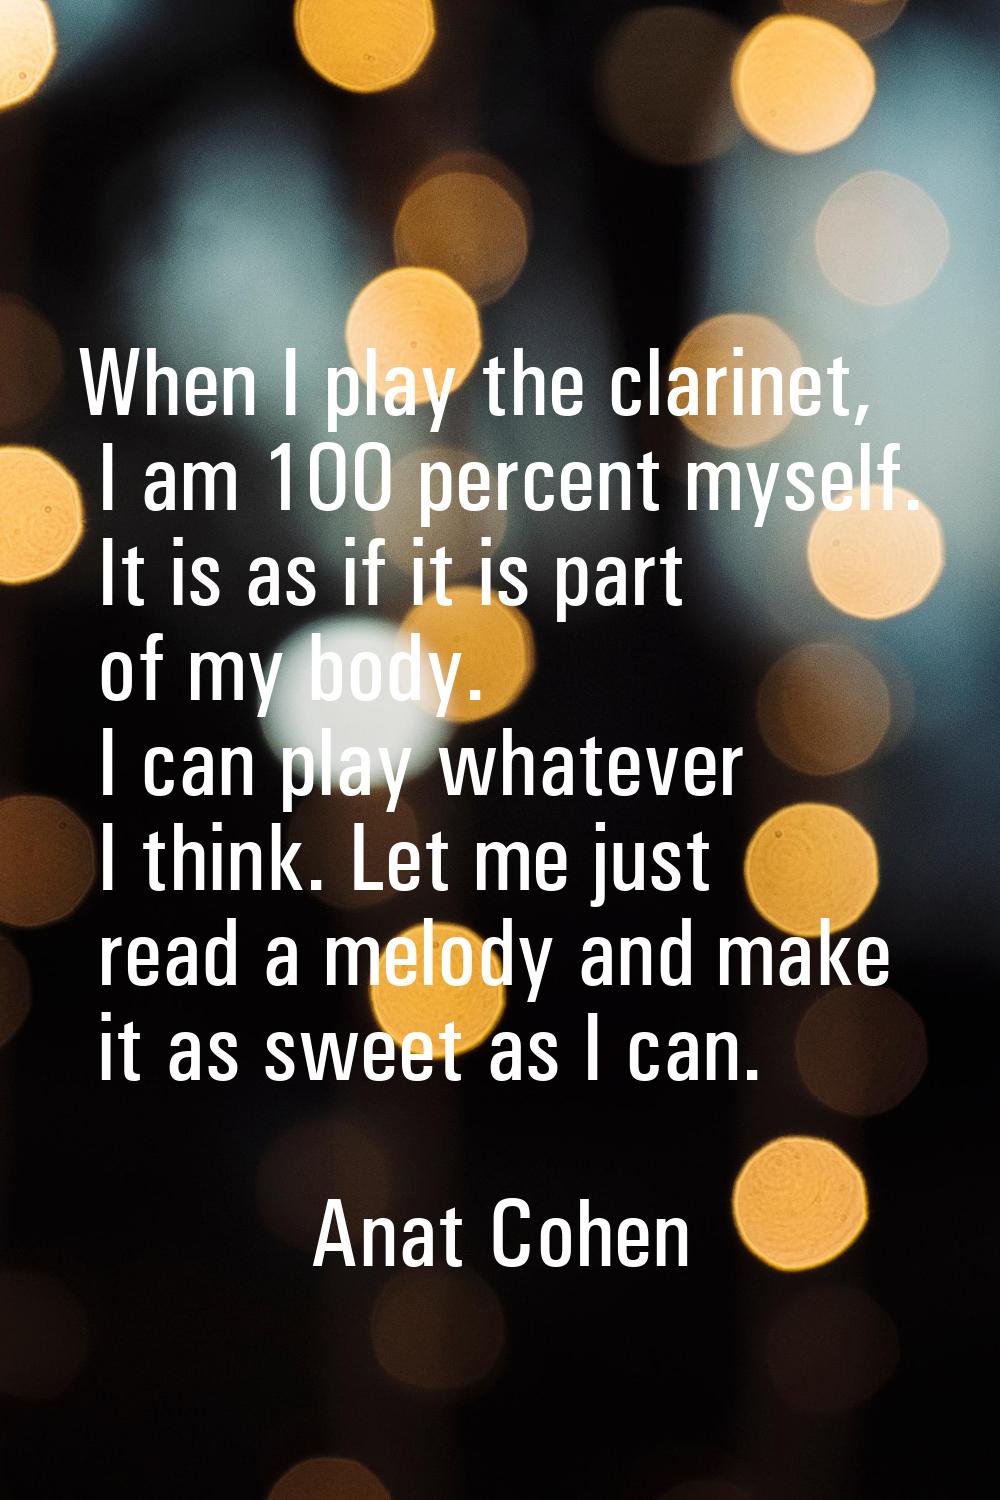 When I play the clarinet, I am 100 percent myself. It is as if it is part of my body. I can play wh